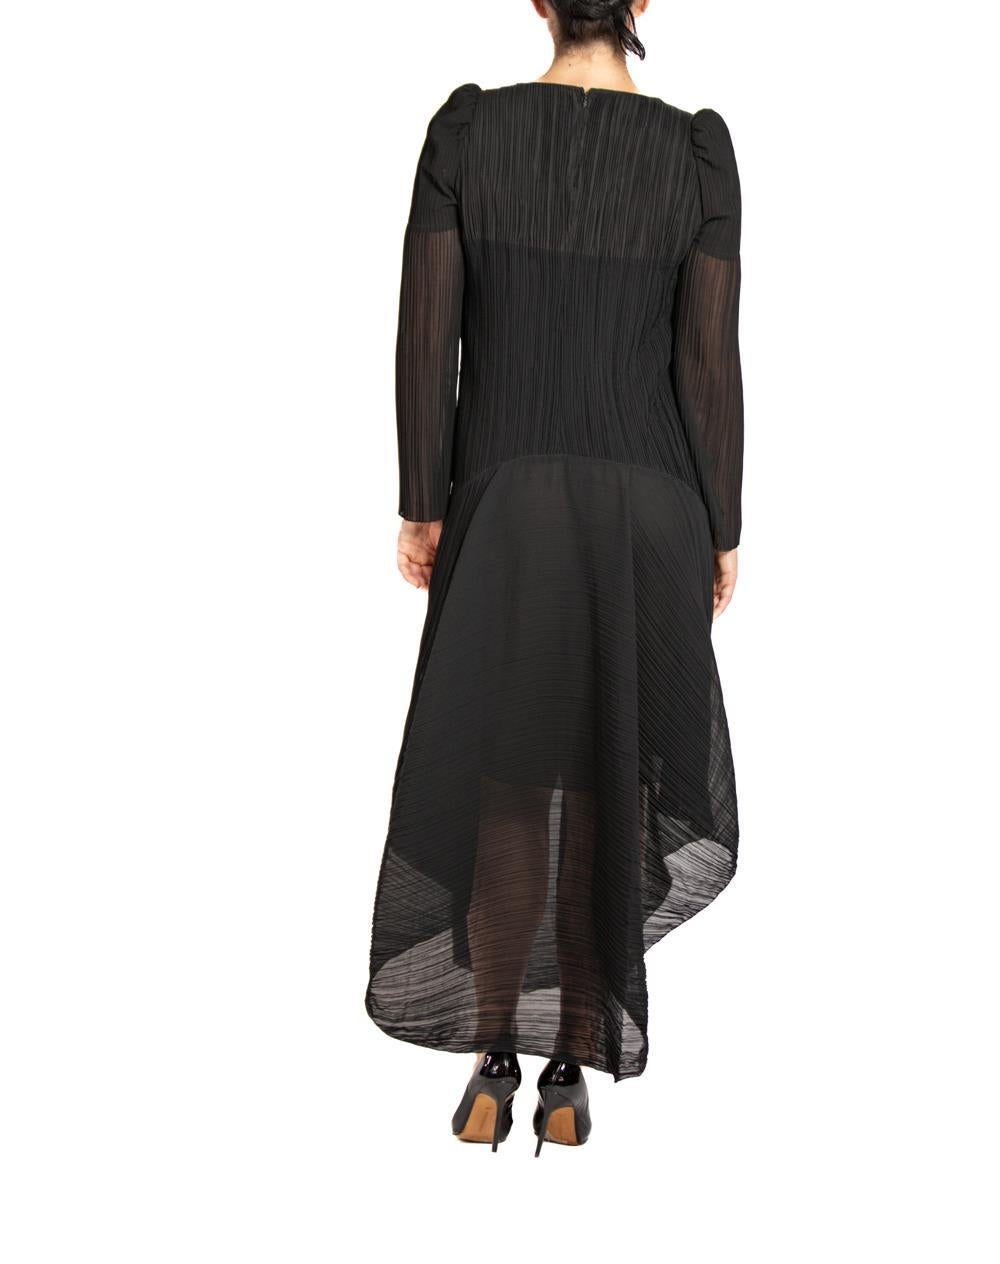 Women's 1980S KARL LAGERFELD CHLOE Black Pleated Chiffon Dress With Sleeves For Sale